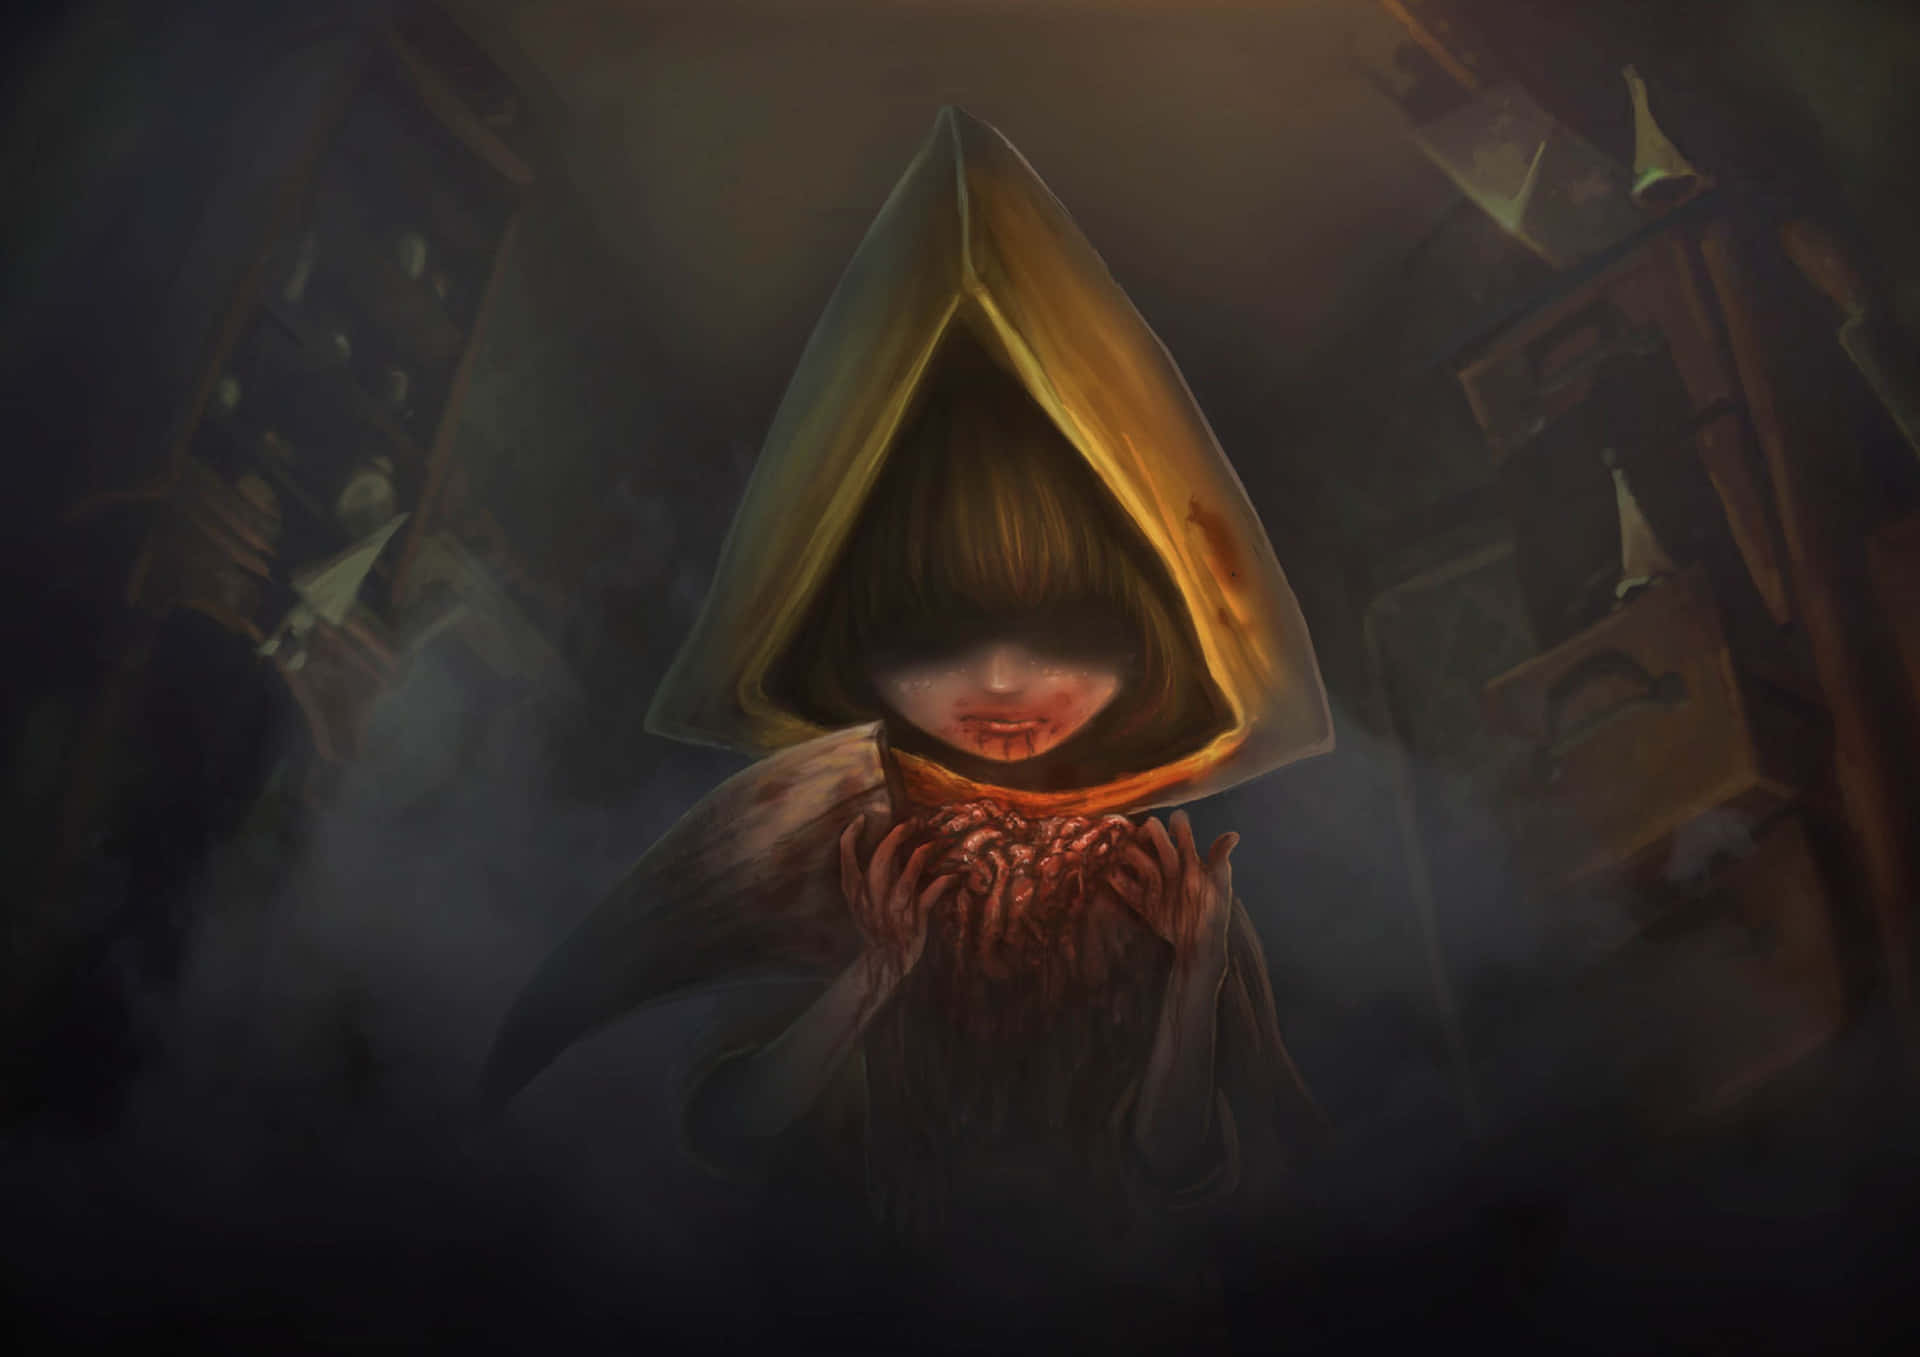 Dark and mysterious world of Little Nightmares.